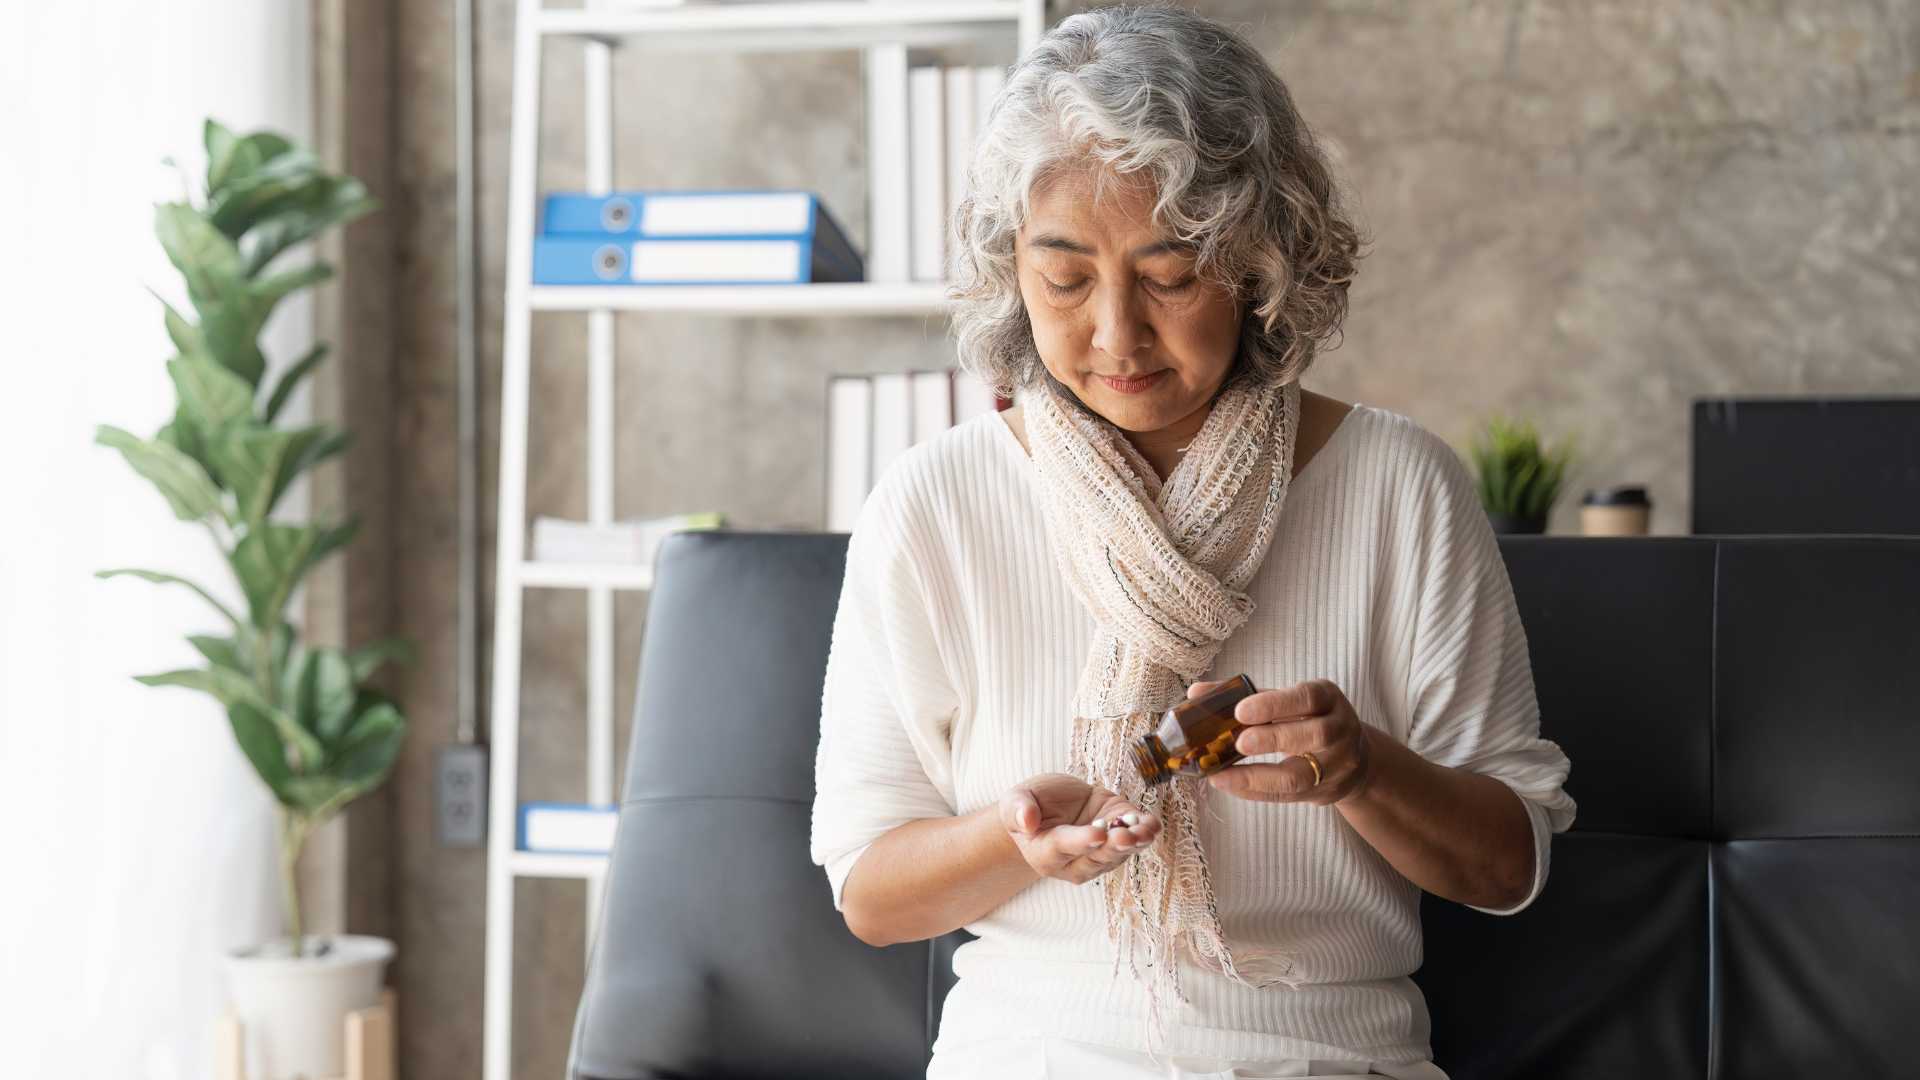 Older woman pouring pills into hand